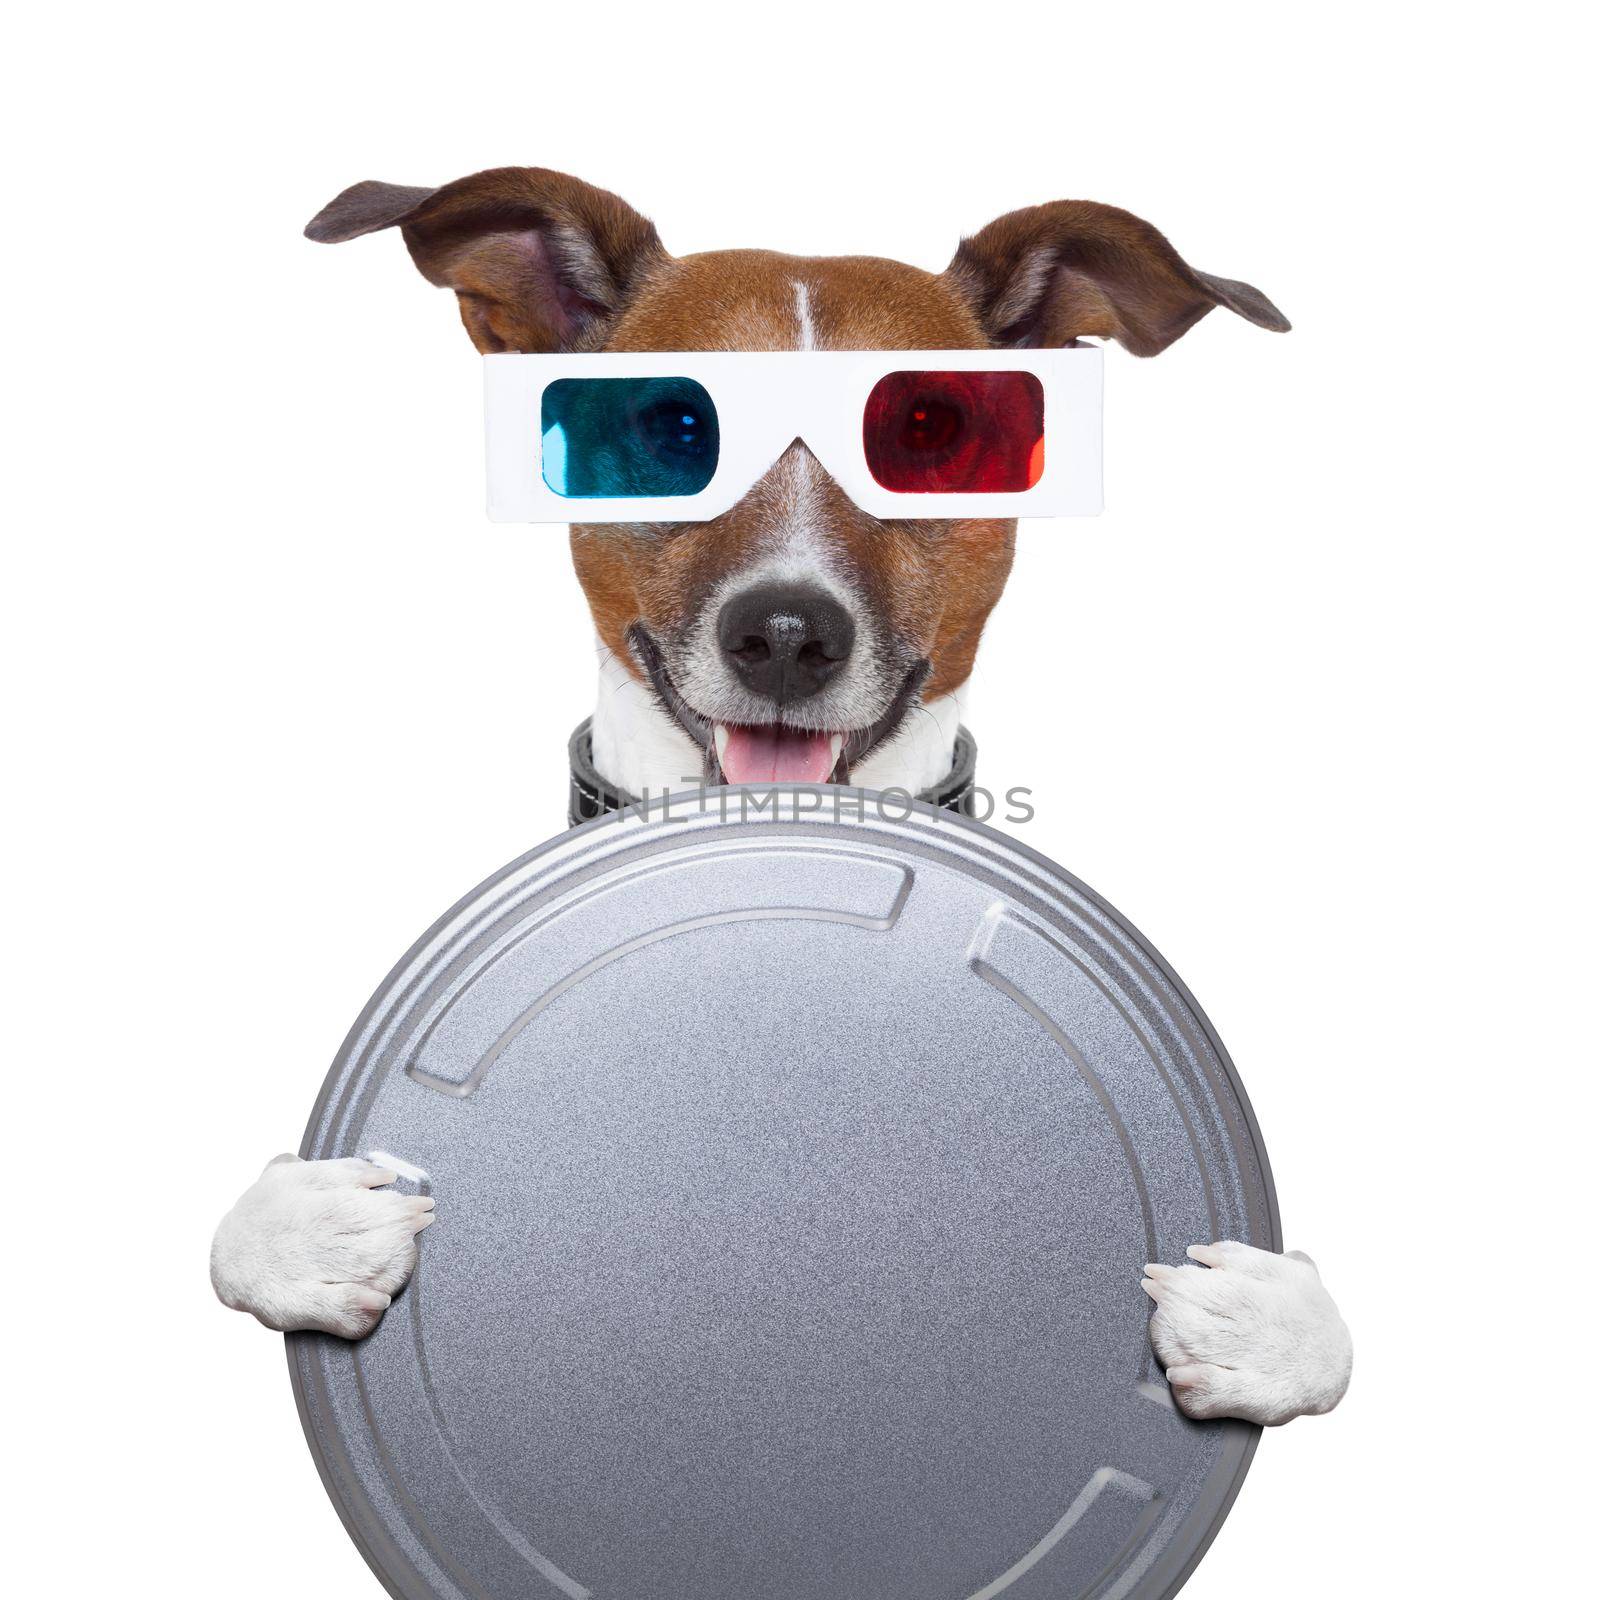 movie film canister 3d glasses dog by Brosch